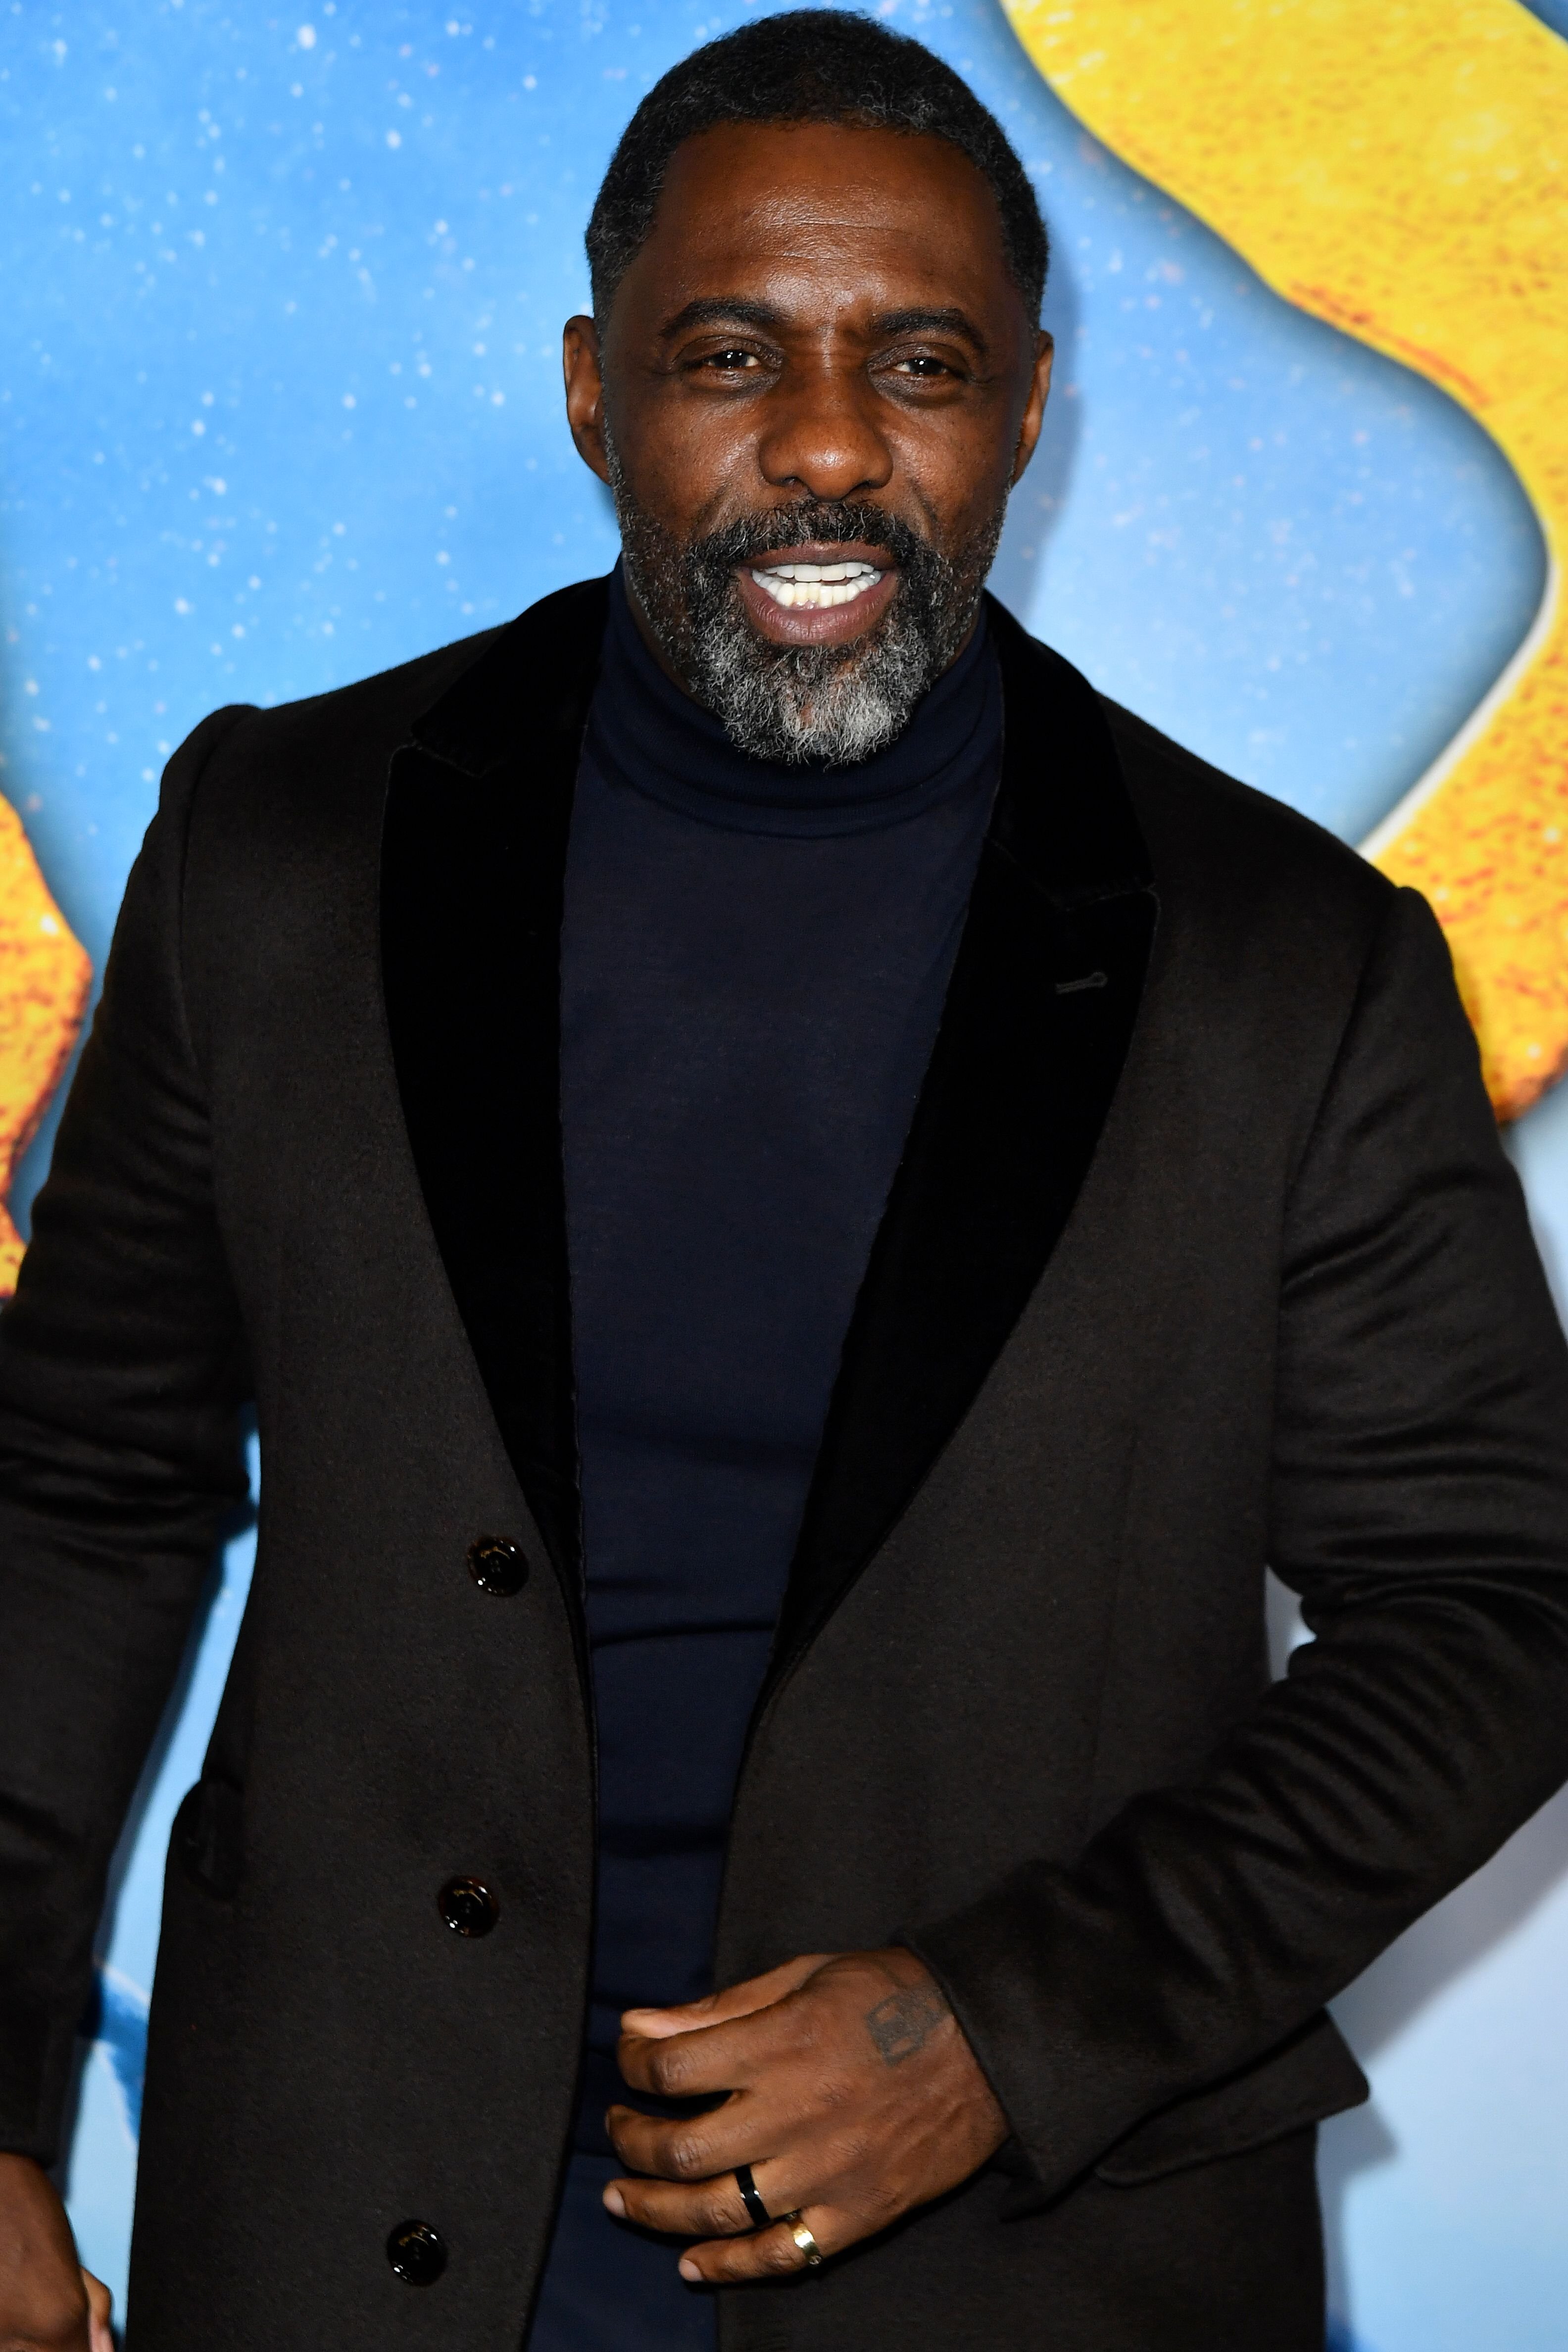 Idris Elba attends the premiere of "Cats" at the Alice Tully Hall in New York City, on December 16, 2019. | Source: Getty Images